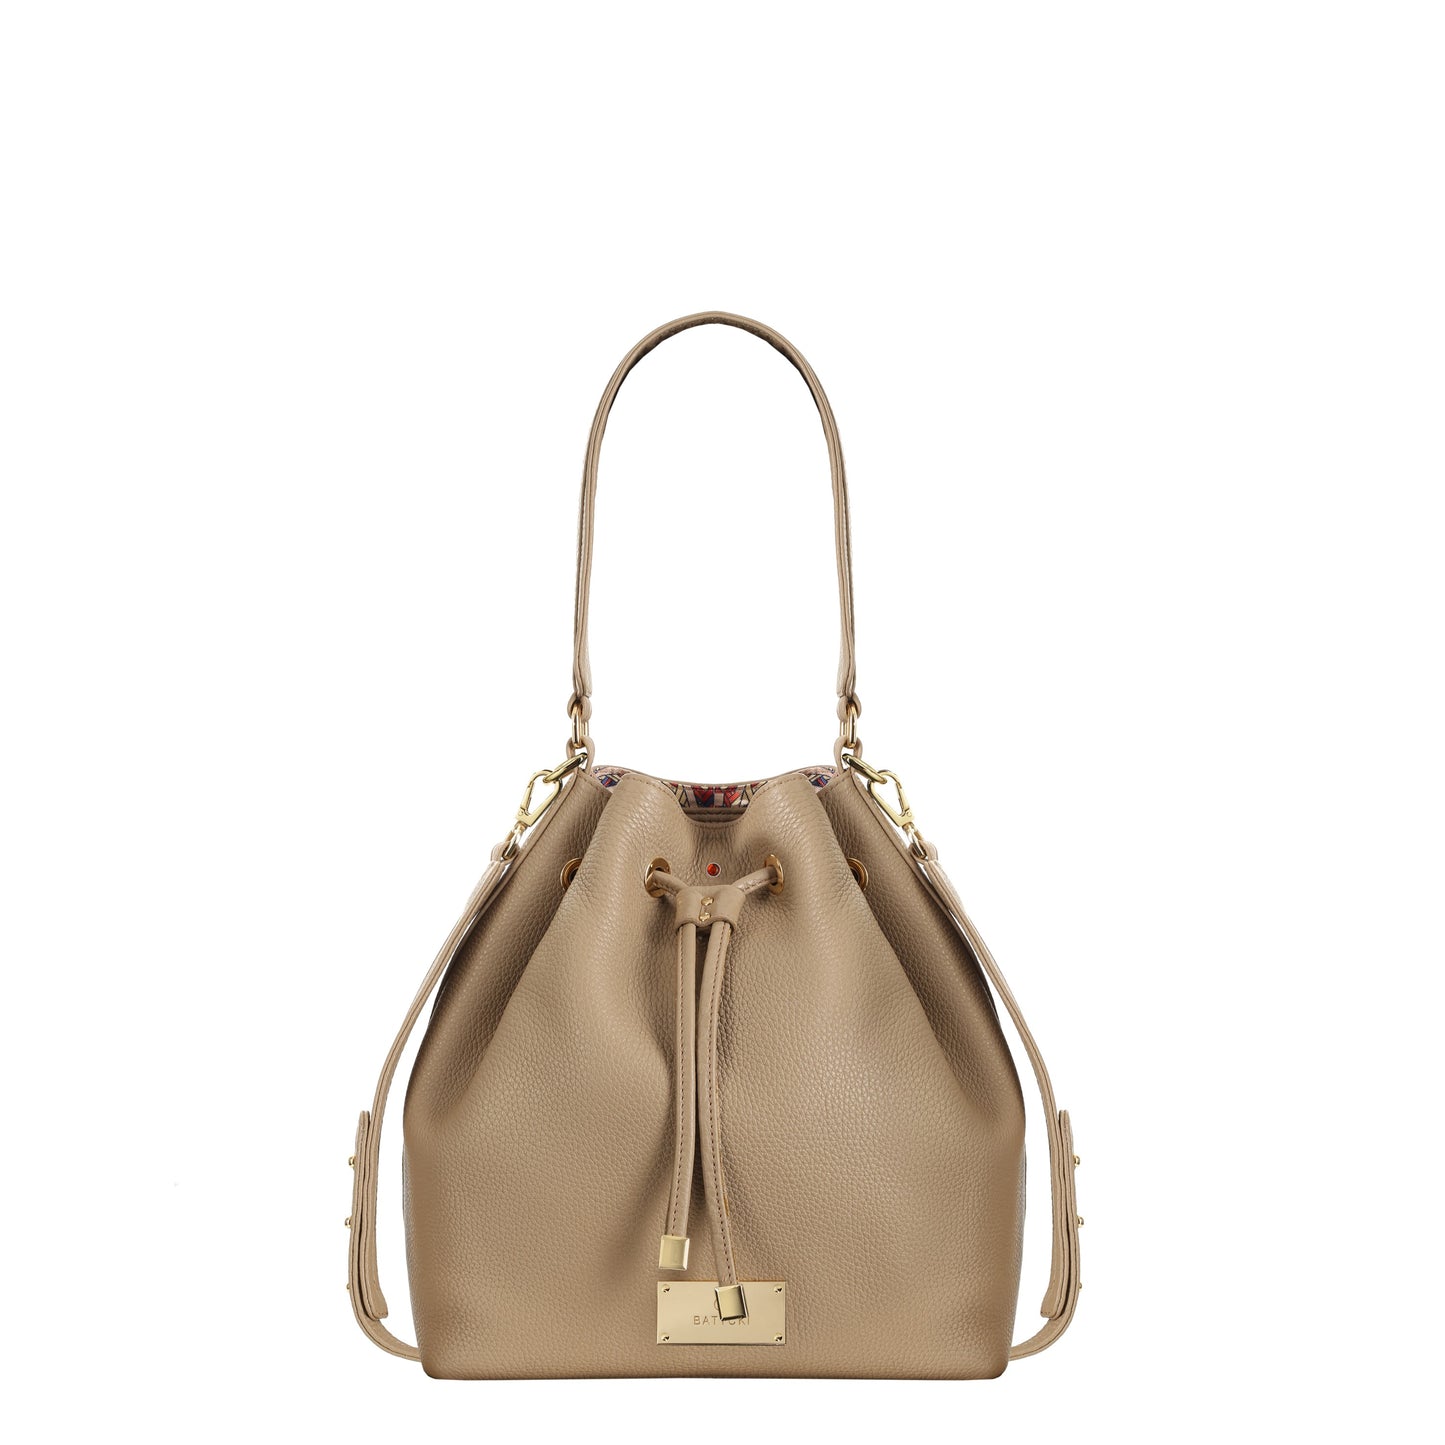 BE RELAXED women's leather bag, floter taupe